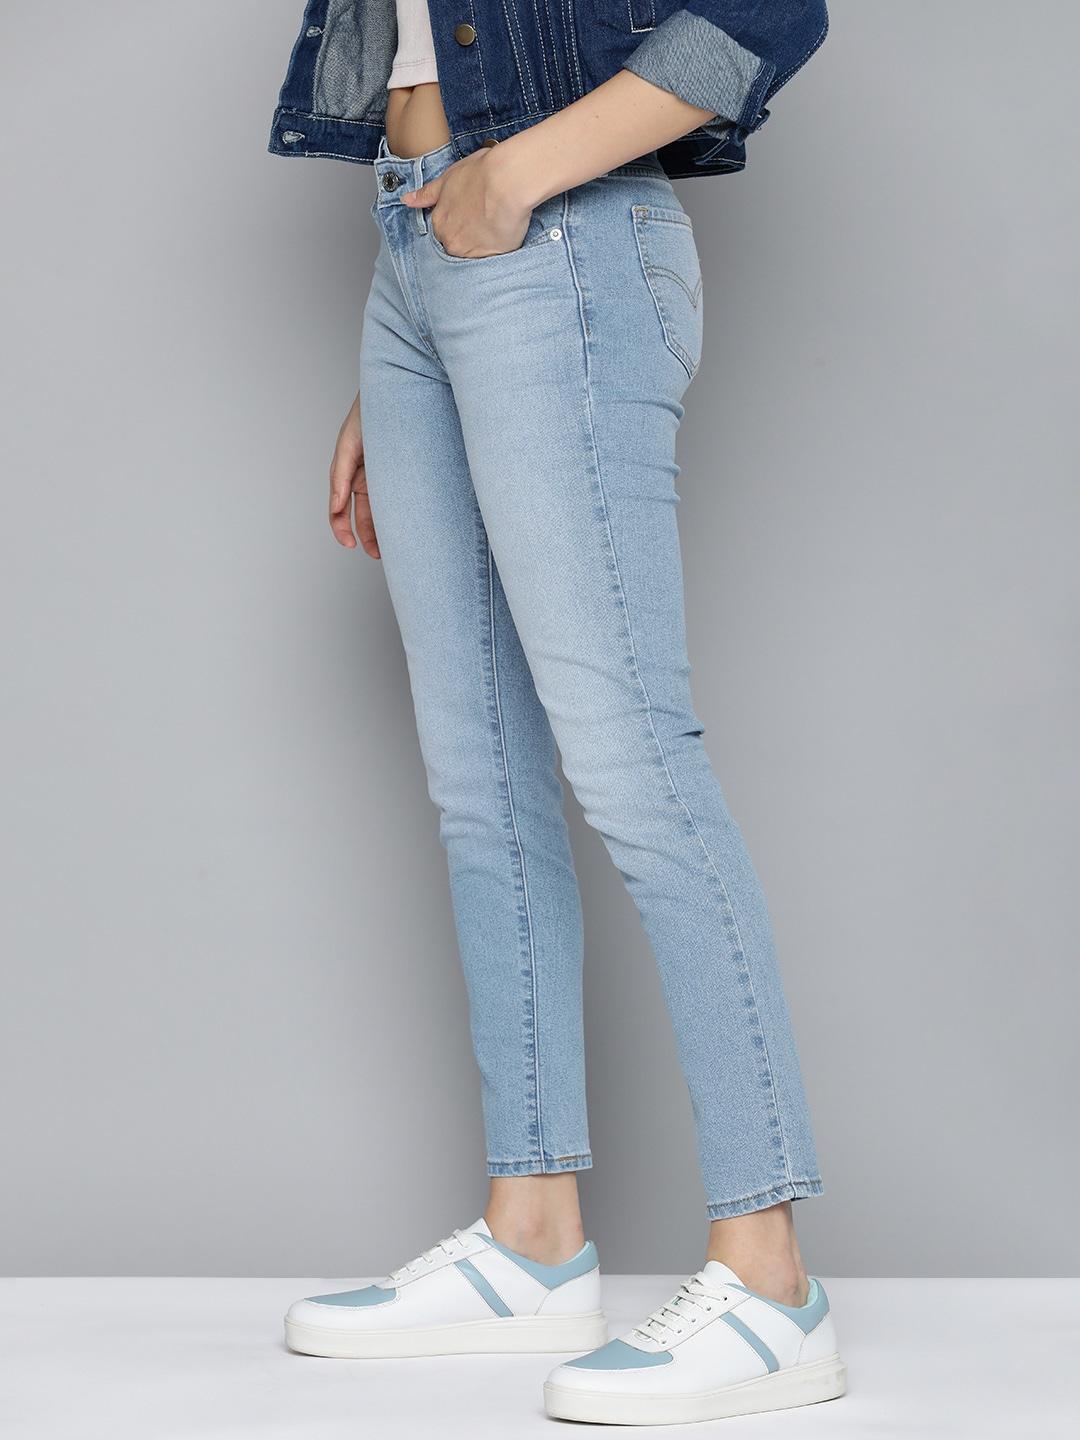 Levis Women Mid-Rise Skinny Fit Light Fade Stretchable Jeans